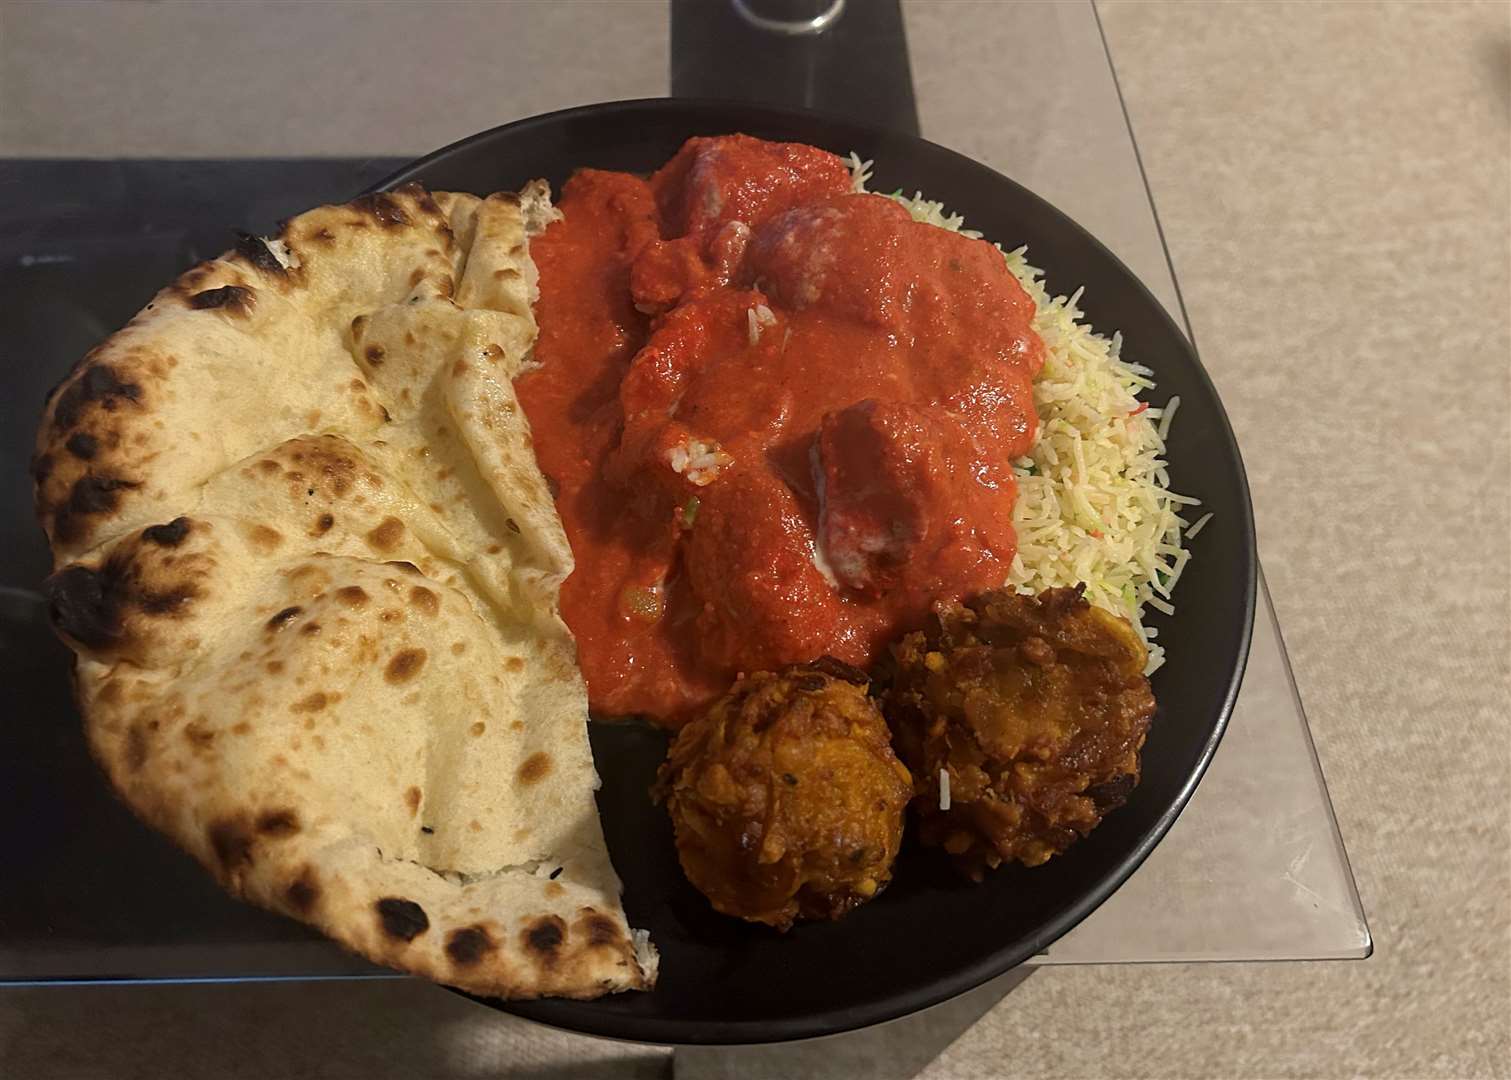 This Indian takeaway arrived within half an hour and was packed with flavour